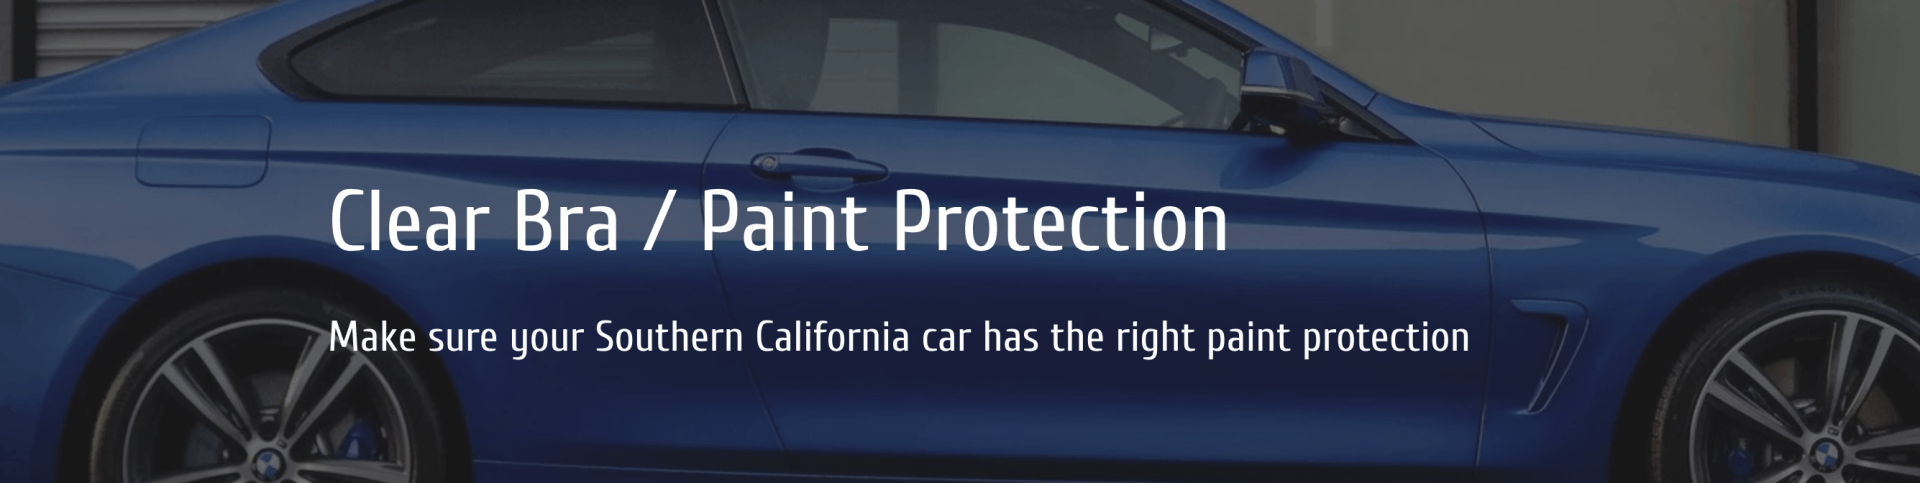 XPEL Paint Protection Film, San Diego CLEAR BRA